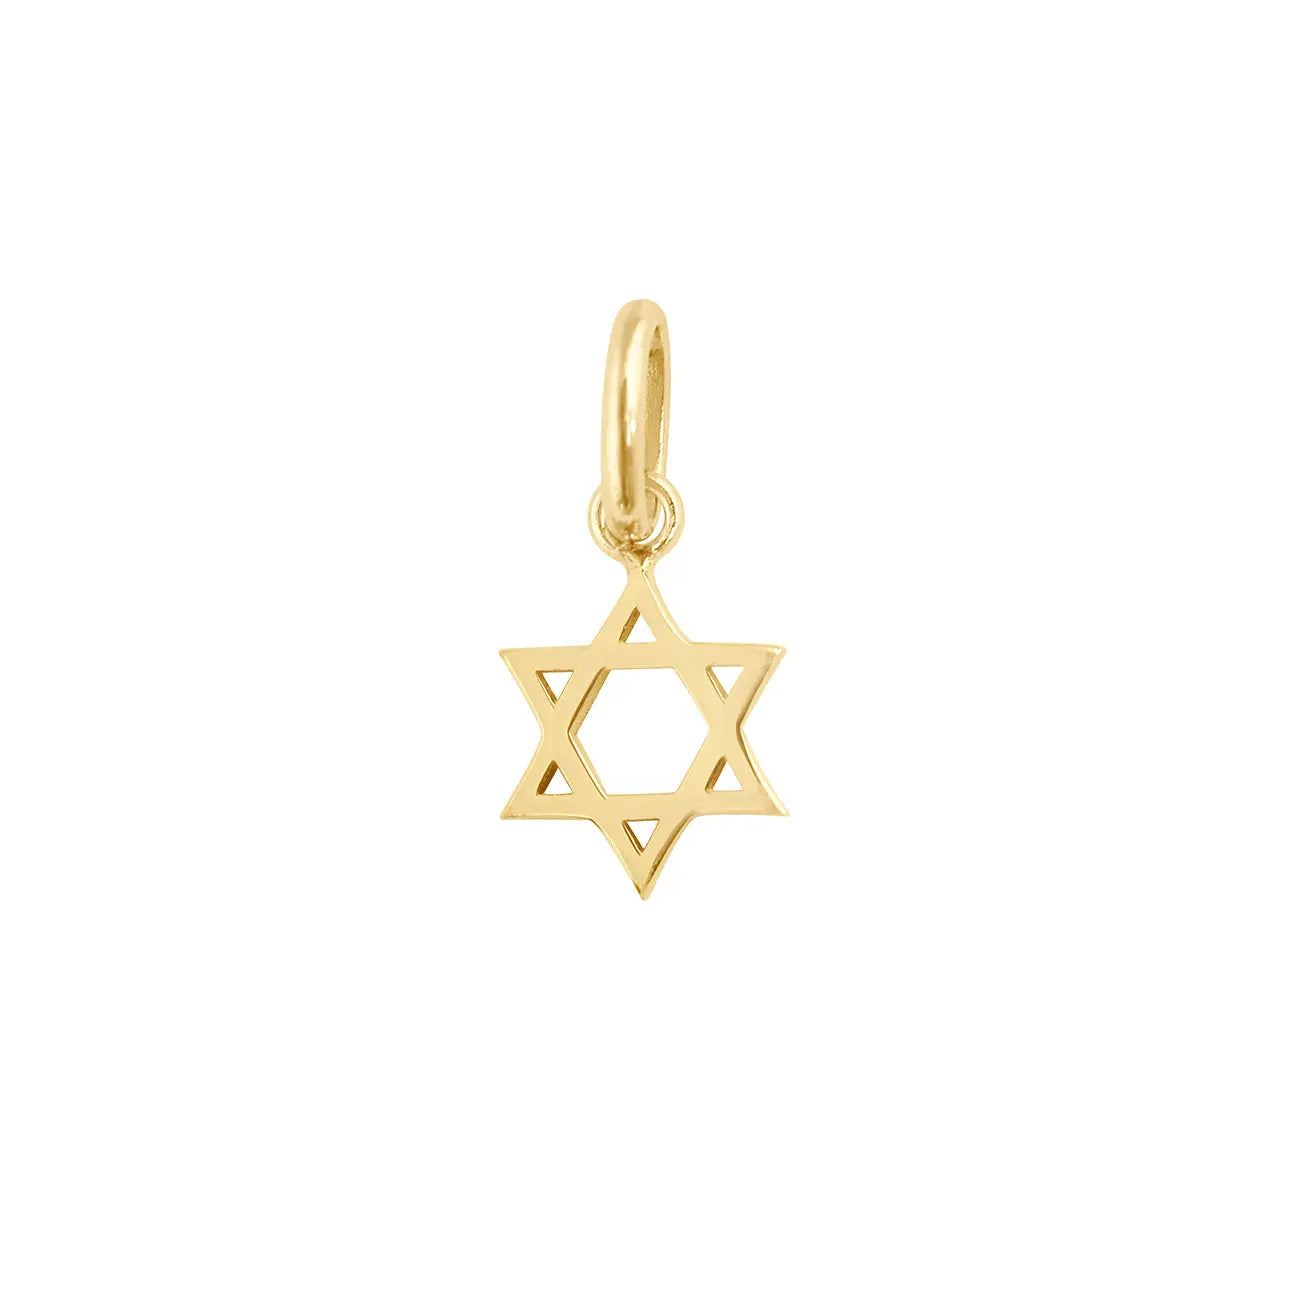 The all-gold Star of David is tastefully delicate and the epitome of simple class. gigi CLOZEAU 18k yellow gold Star of David pendant. Each jewel is unique, artisanally made in its family-owned workshop. The pendant measures 0.8" (with 0.6" bail), sold without chain.